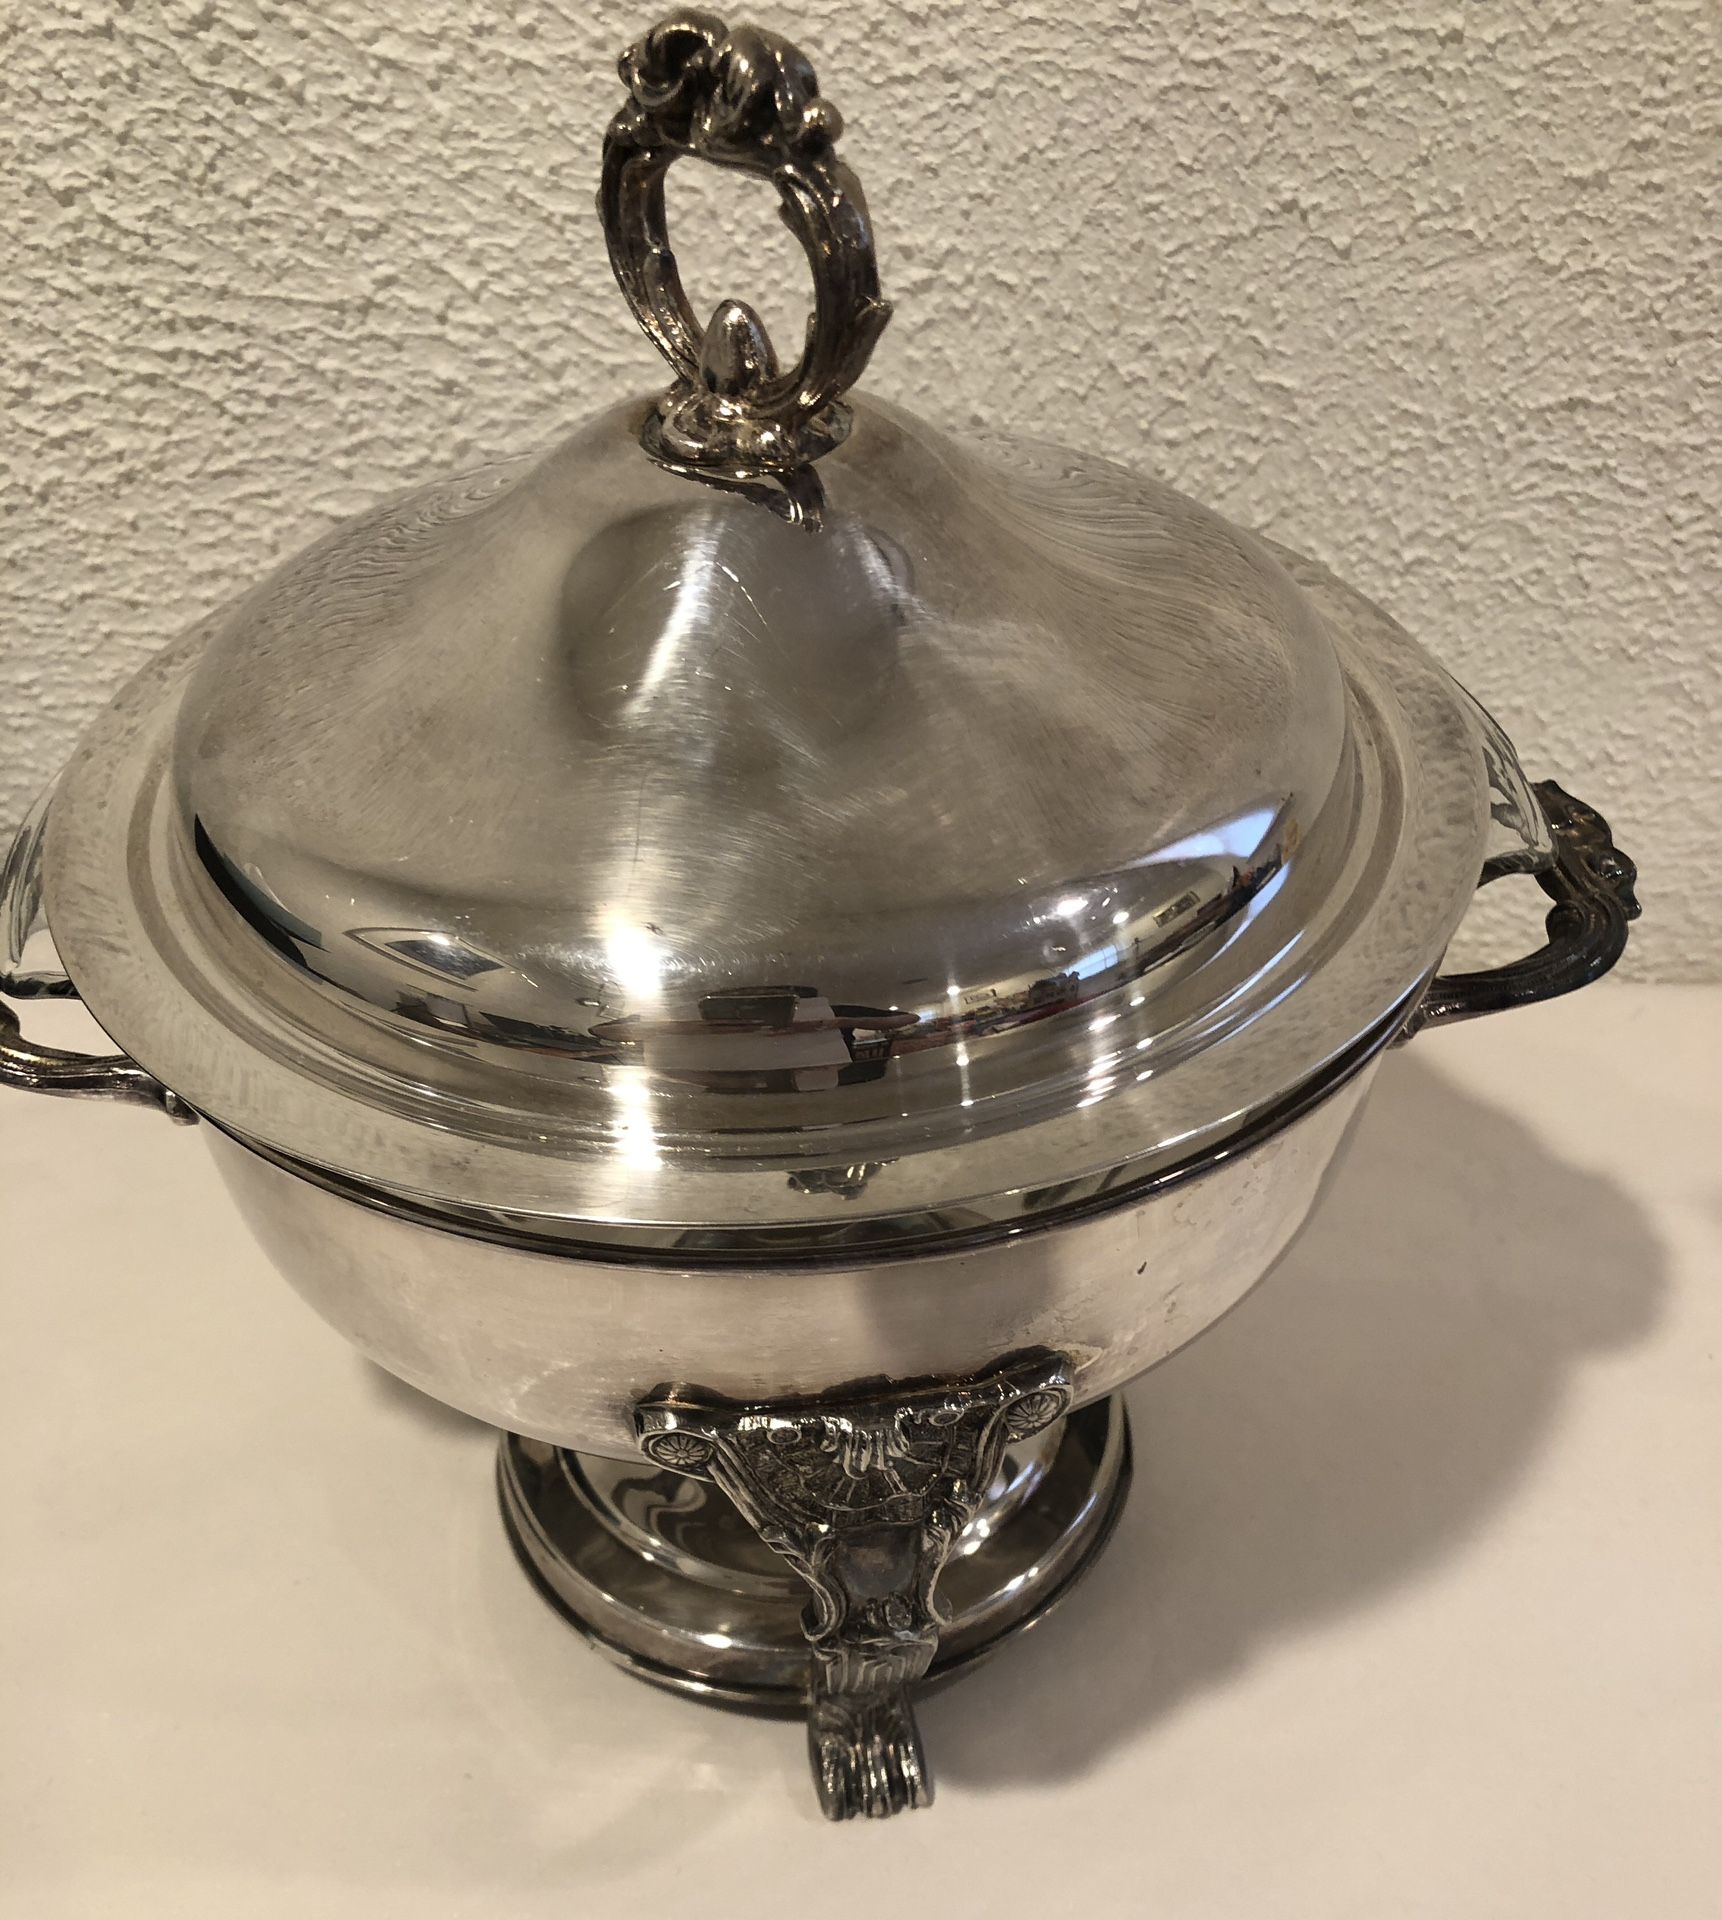 A Set Of 4 Pieces  Footed Silver Plated Chafing Dish 13” Wide And 14” Tall , Includes The Base , The Glass Bowl , Burner And The Lid